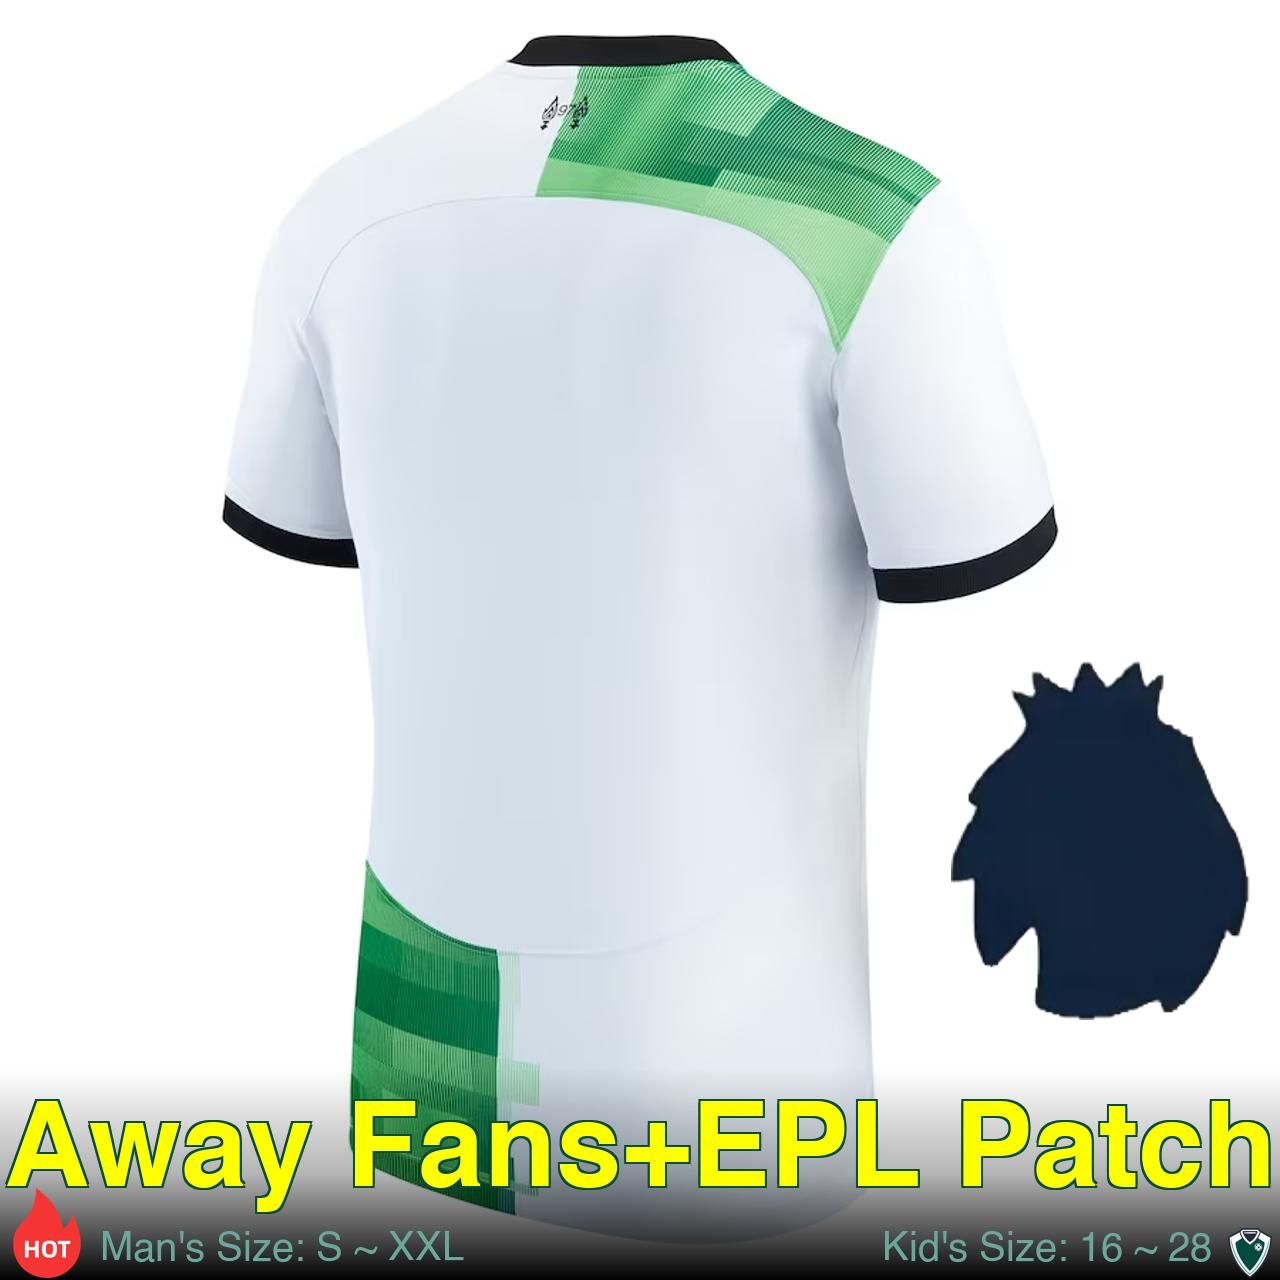 Away Fans+EPL Patch